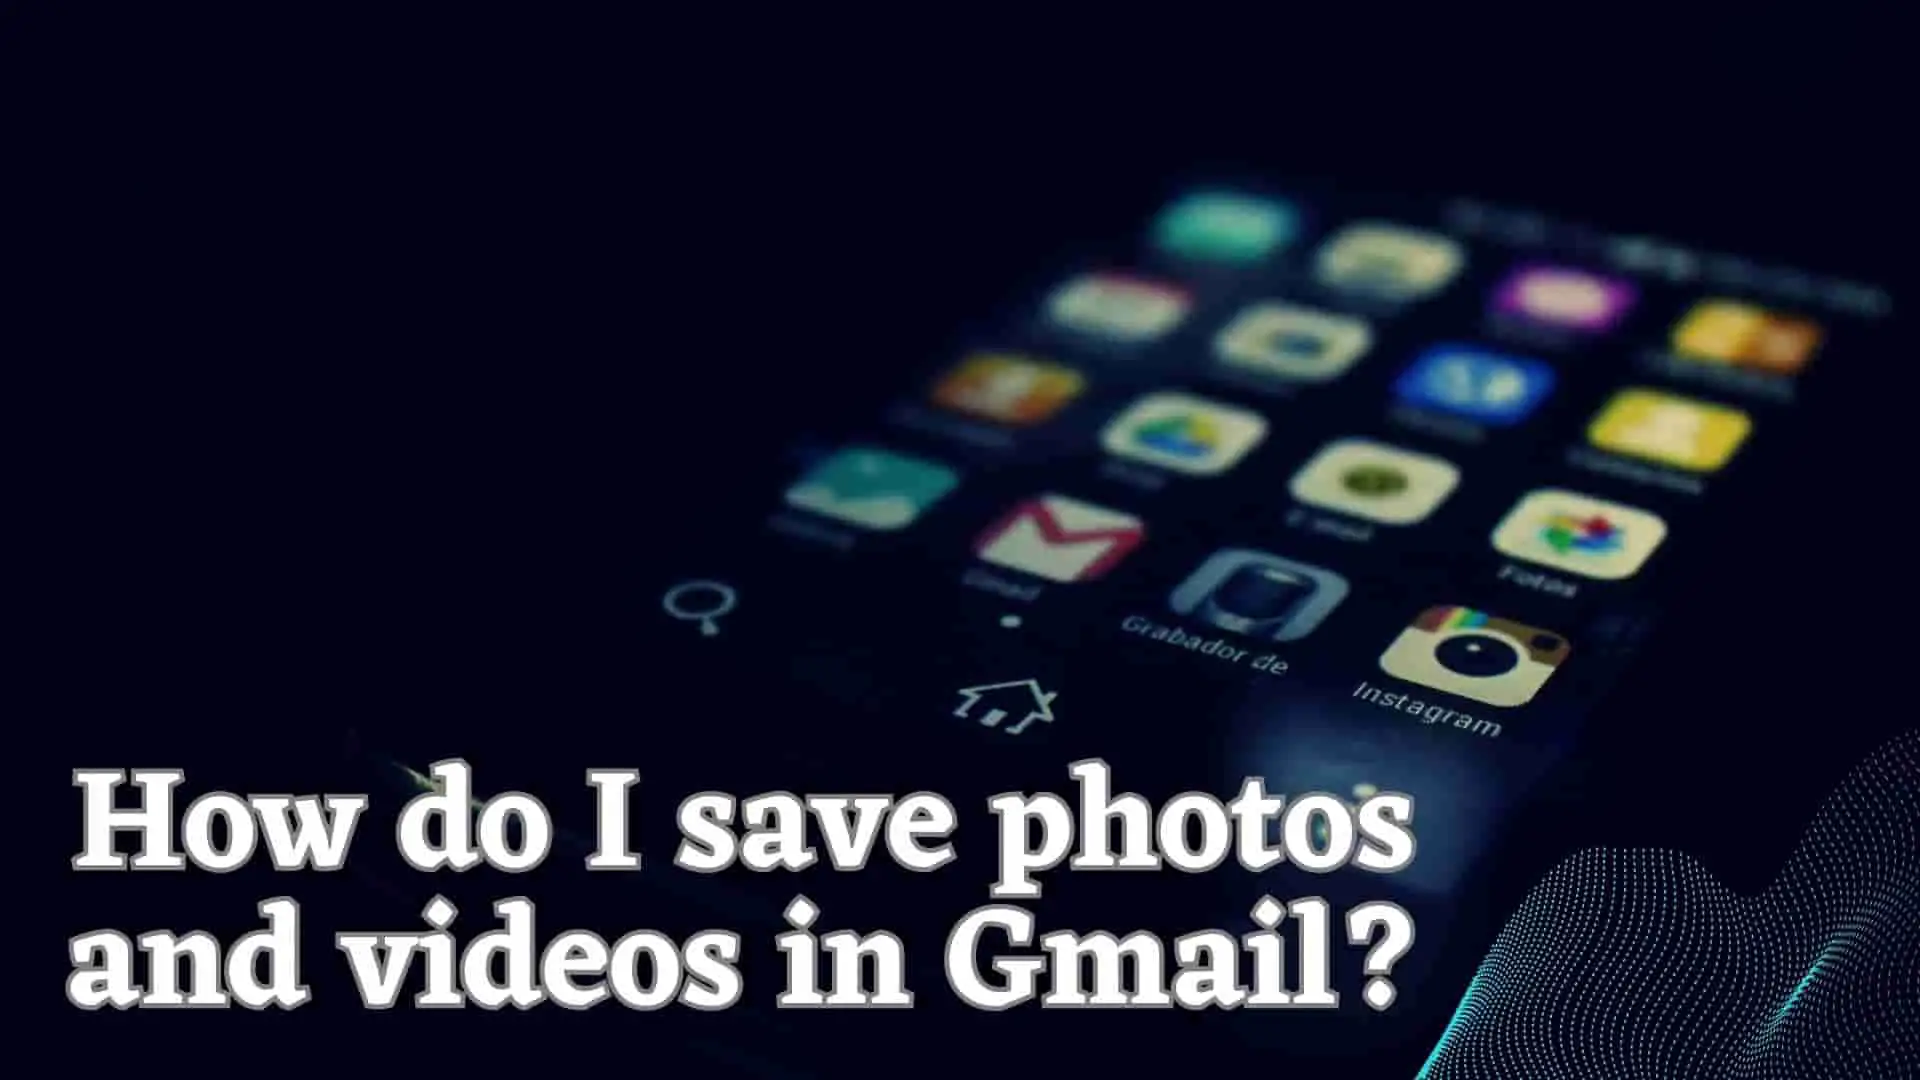 how-to-save-photos-videos-gmail